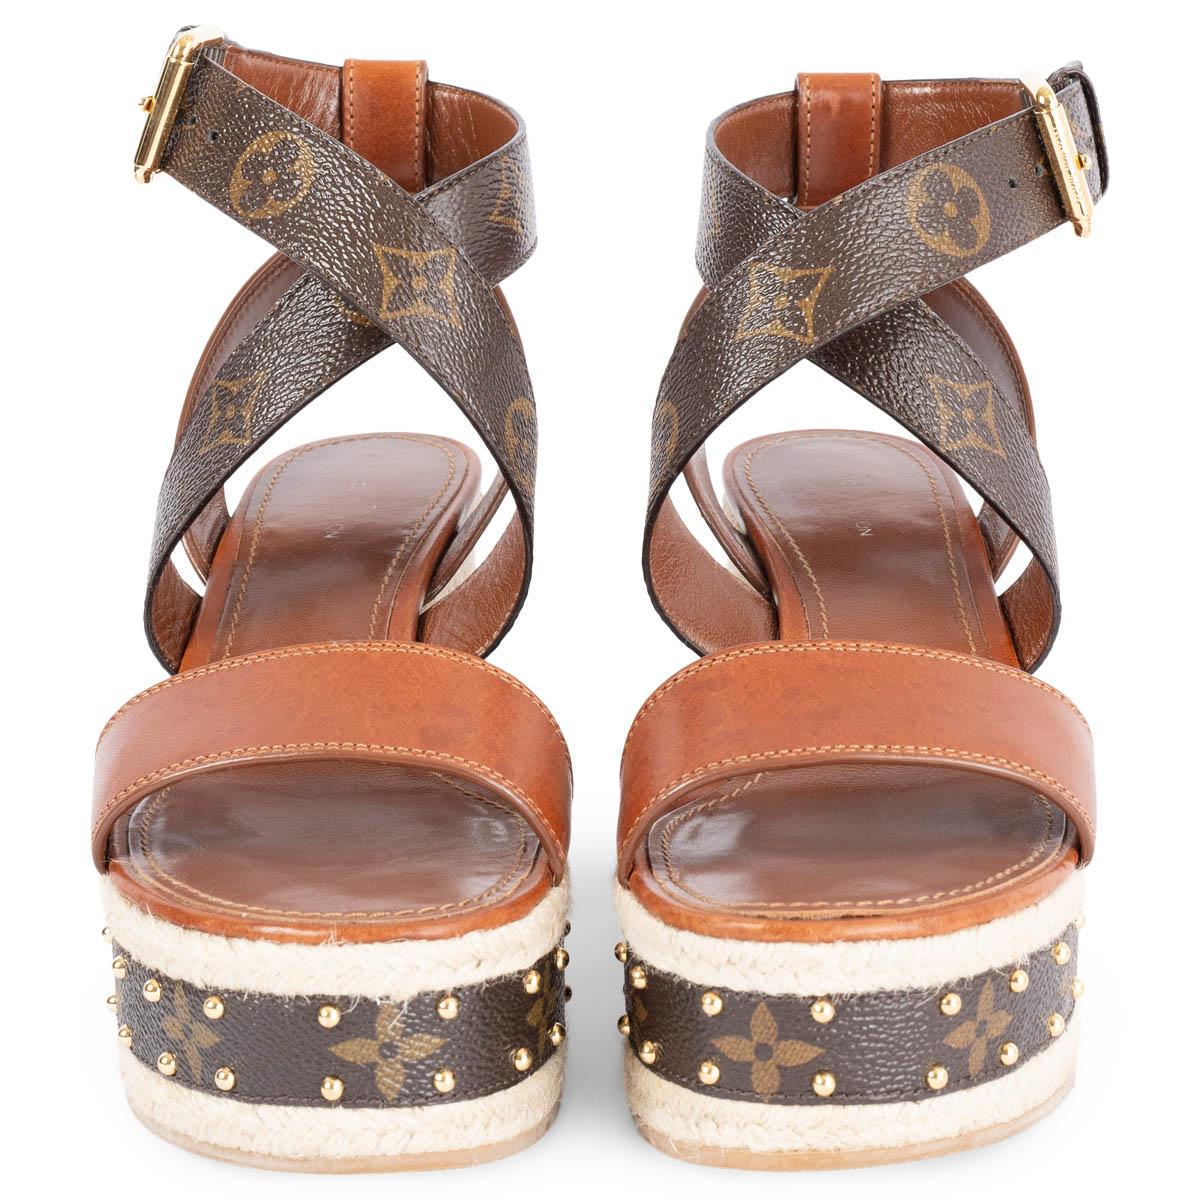 100% authentic Louis Vuitton Boundry wedge sandals in cognac leather brown Monogramm Canvas and raffia platform wedge. Buckle fastening at ankle featuring gold-tone studs. Have been worn and are in excellent condition. 

Measurements
Shoe